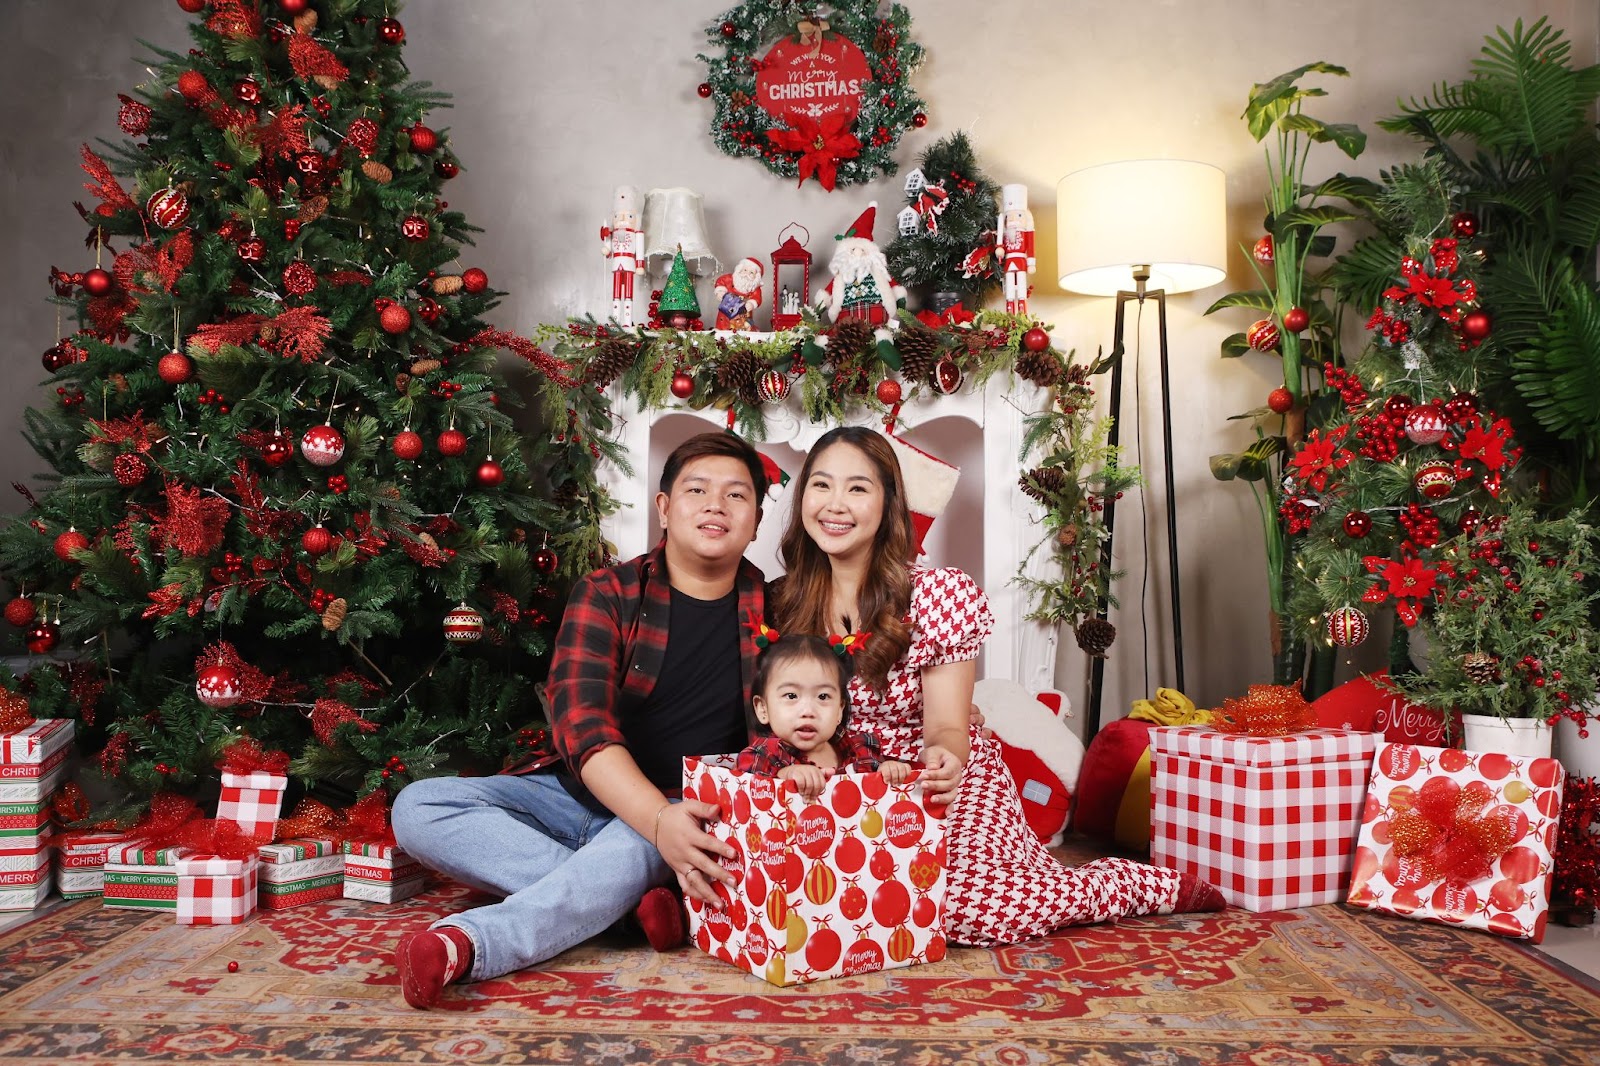 newborn christmas photo idea: baby inside the gift box posing with parents surrounded by Christmas decors